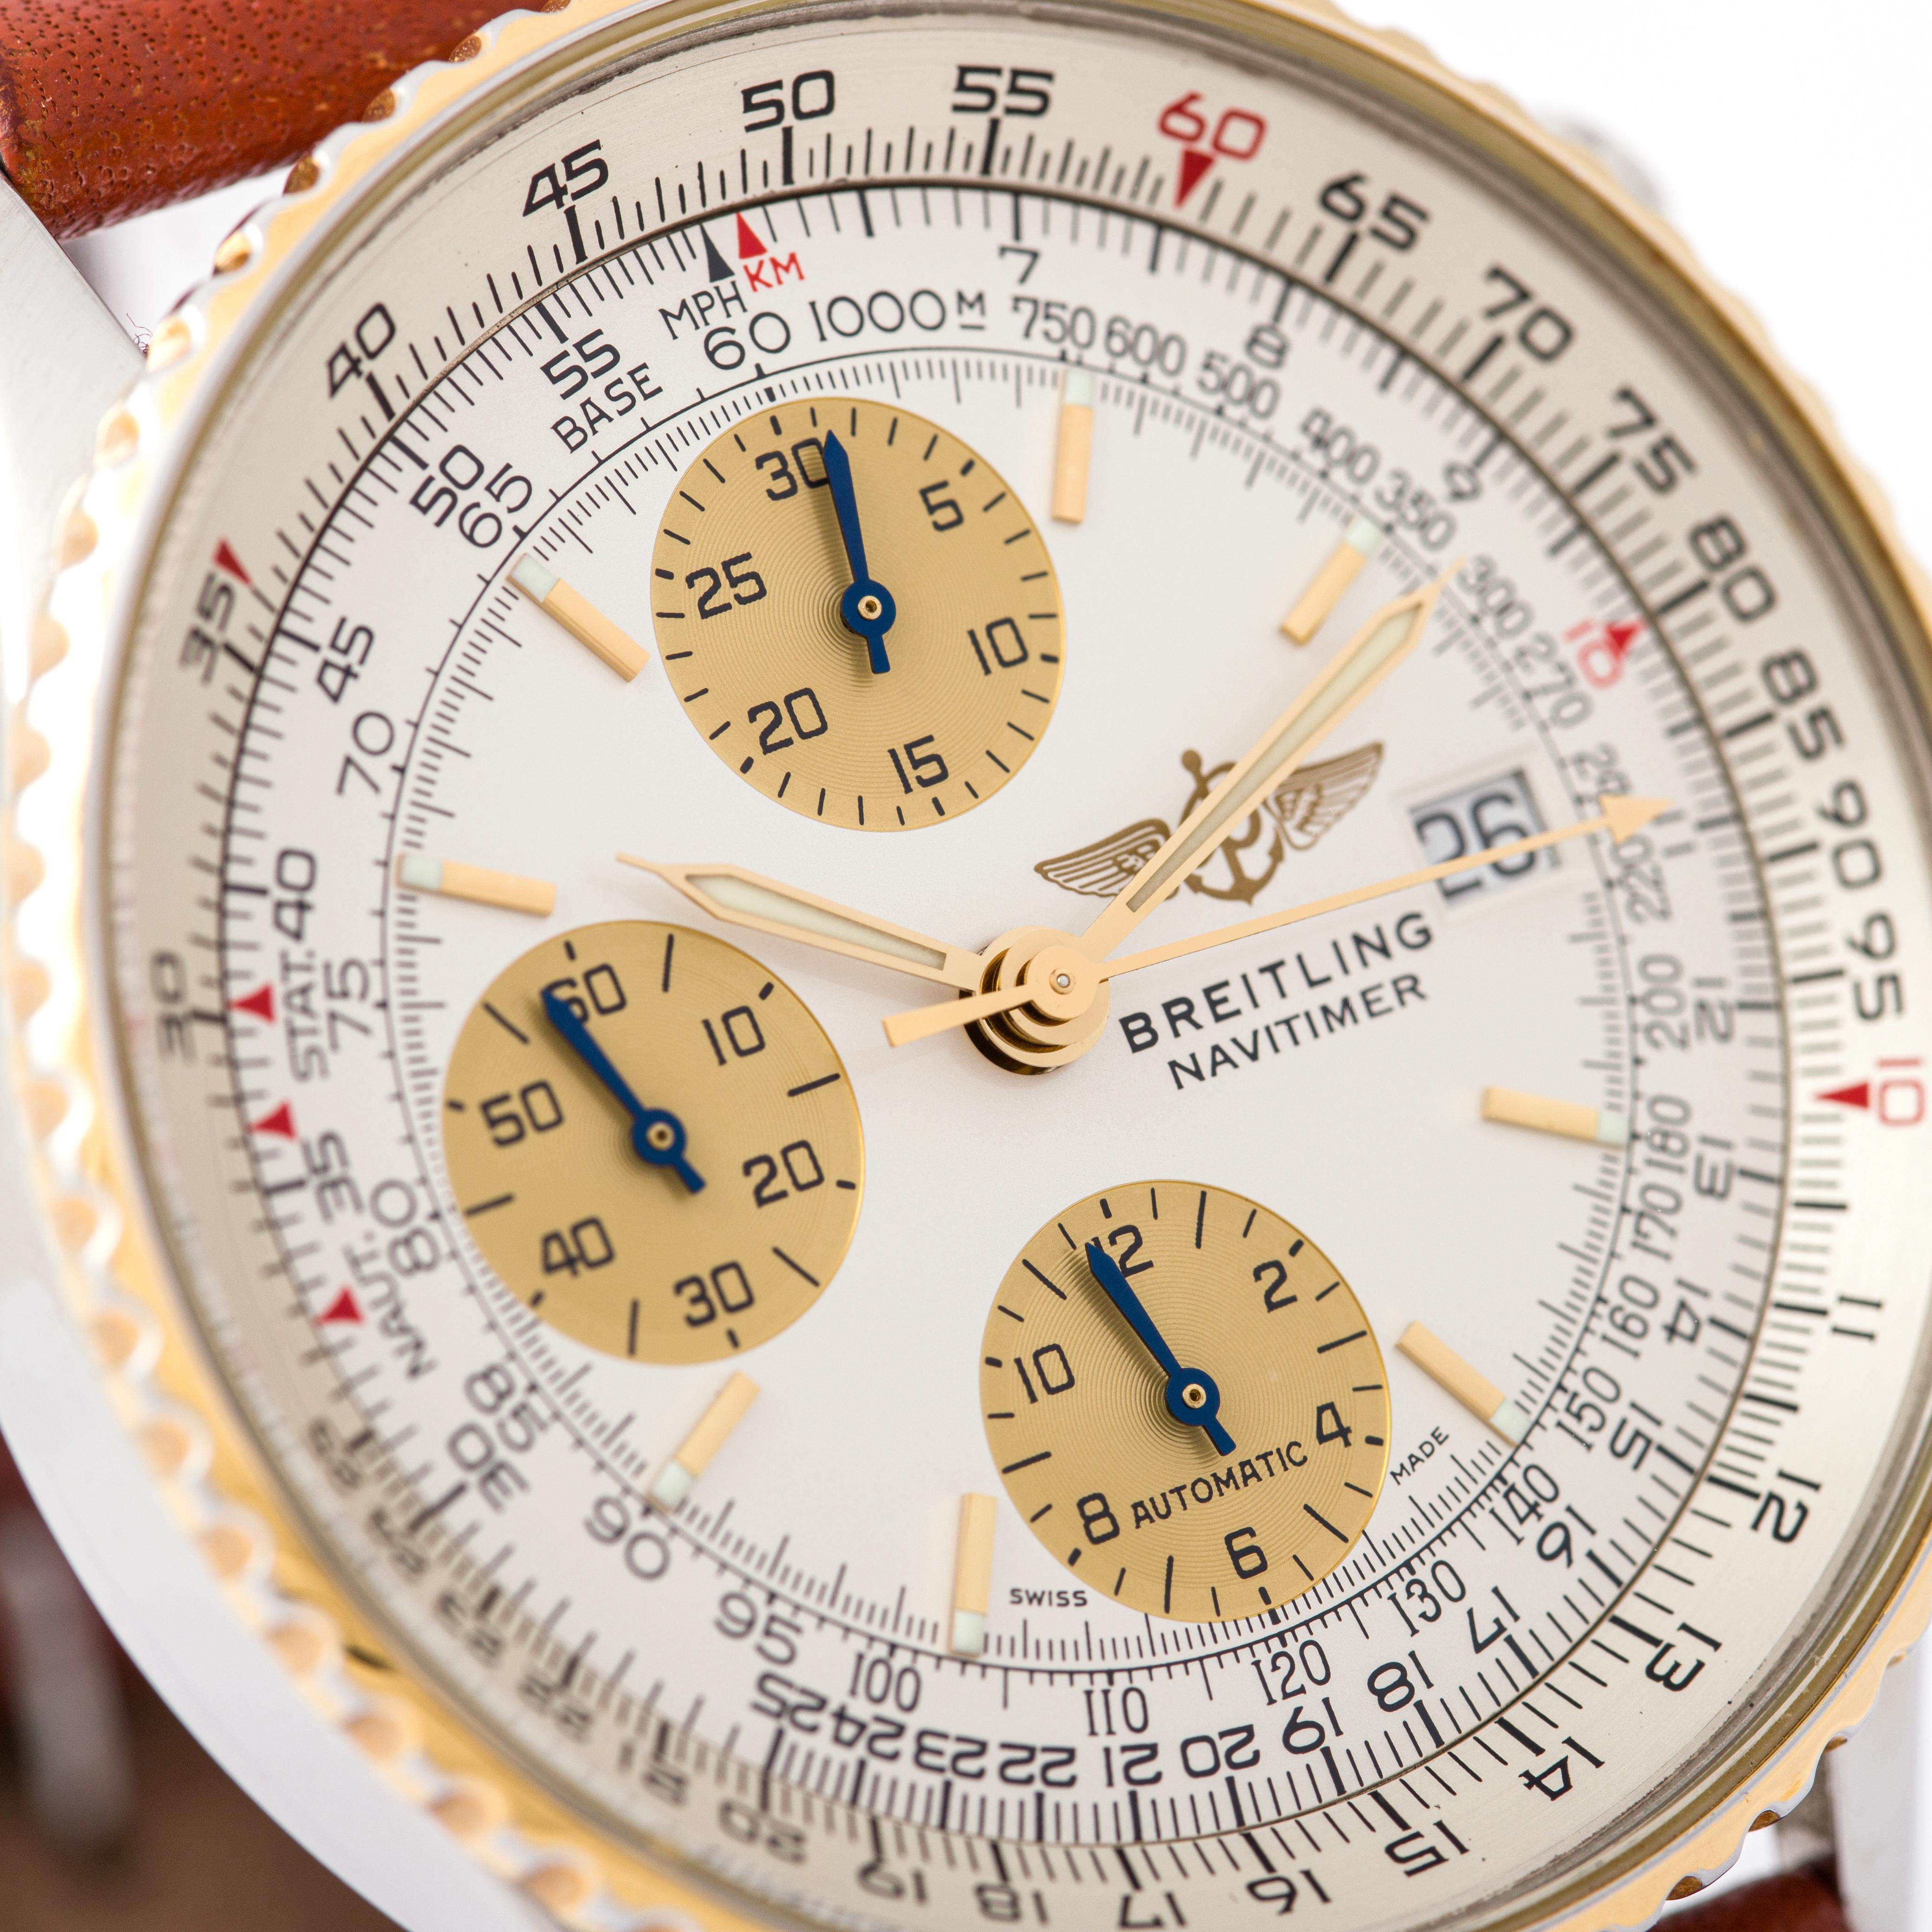 Breitling Navitimer Stainless Steel Yellow Gold Wristwatch 1990S For Sale 3